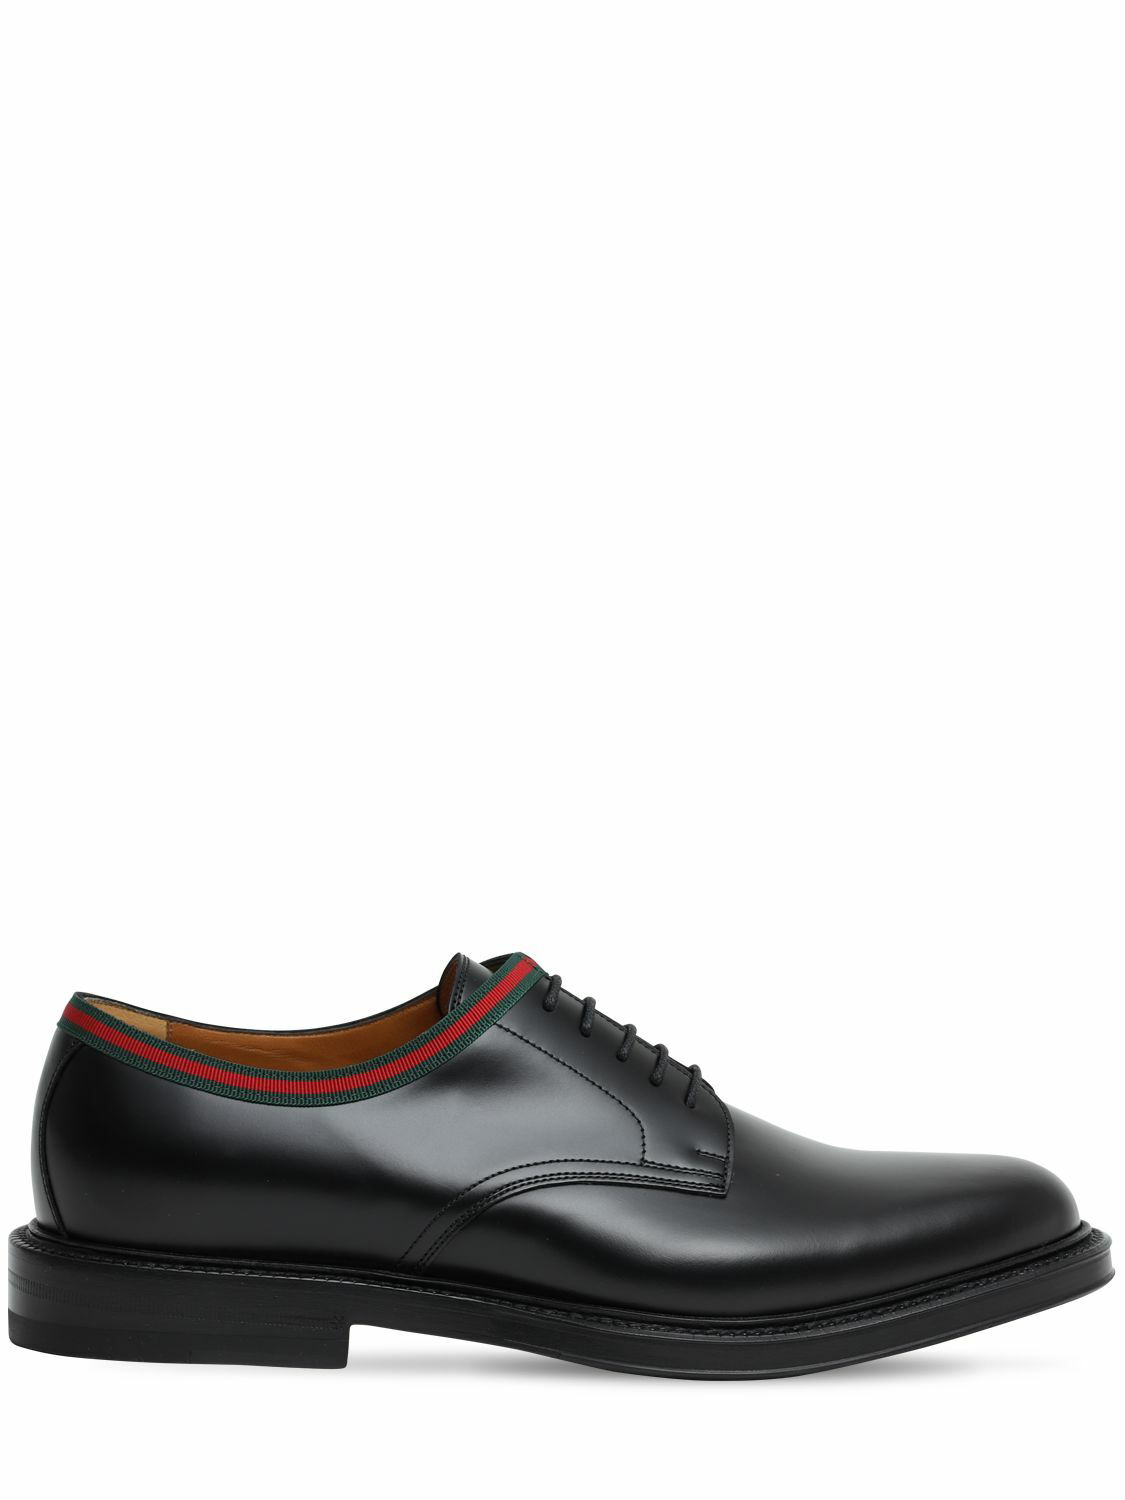 Gucci Arley Leather Derby Shoes, $774, MR PORTER